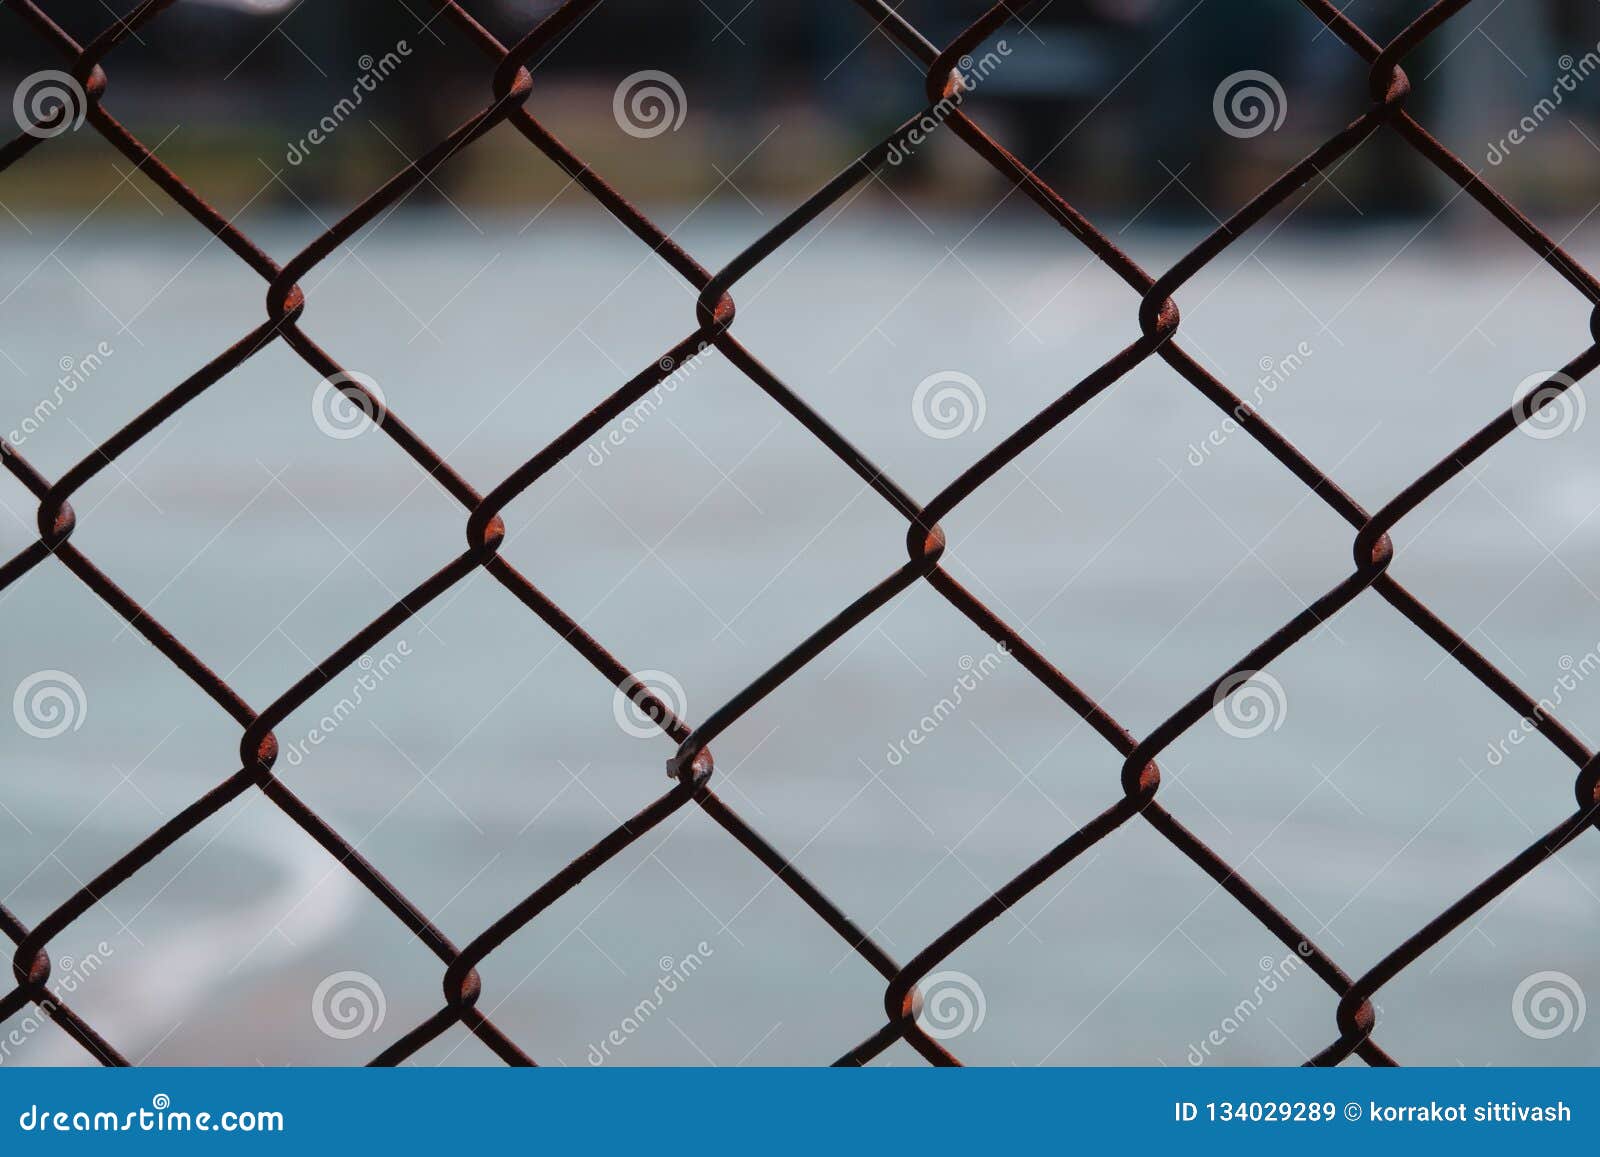 Steel Wire Net Fence With Blurred Green Background Stock Image - Image ...
